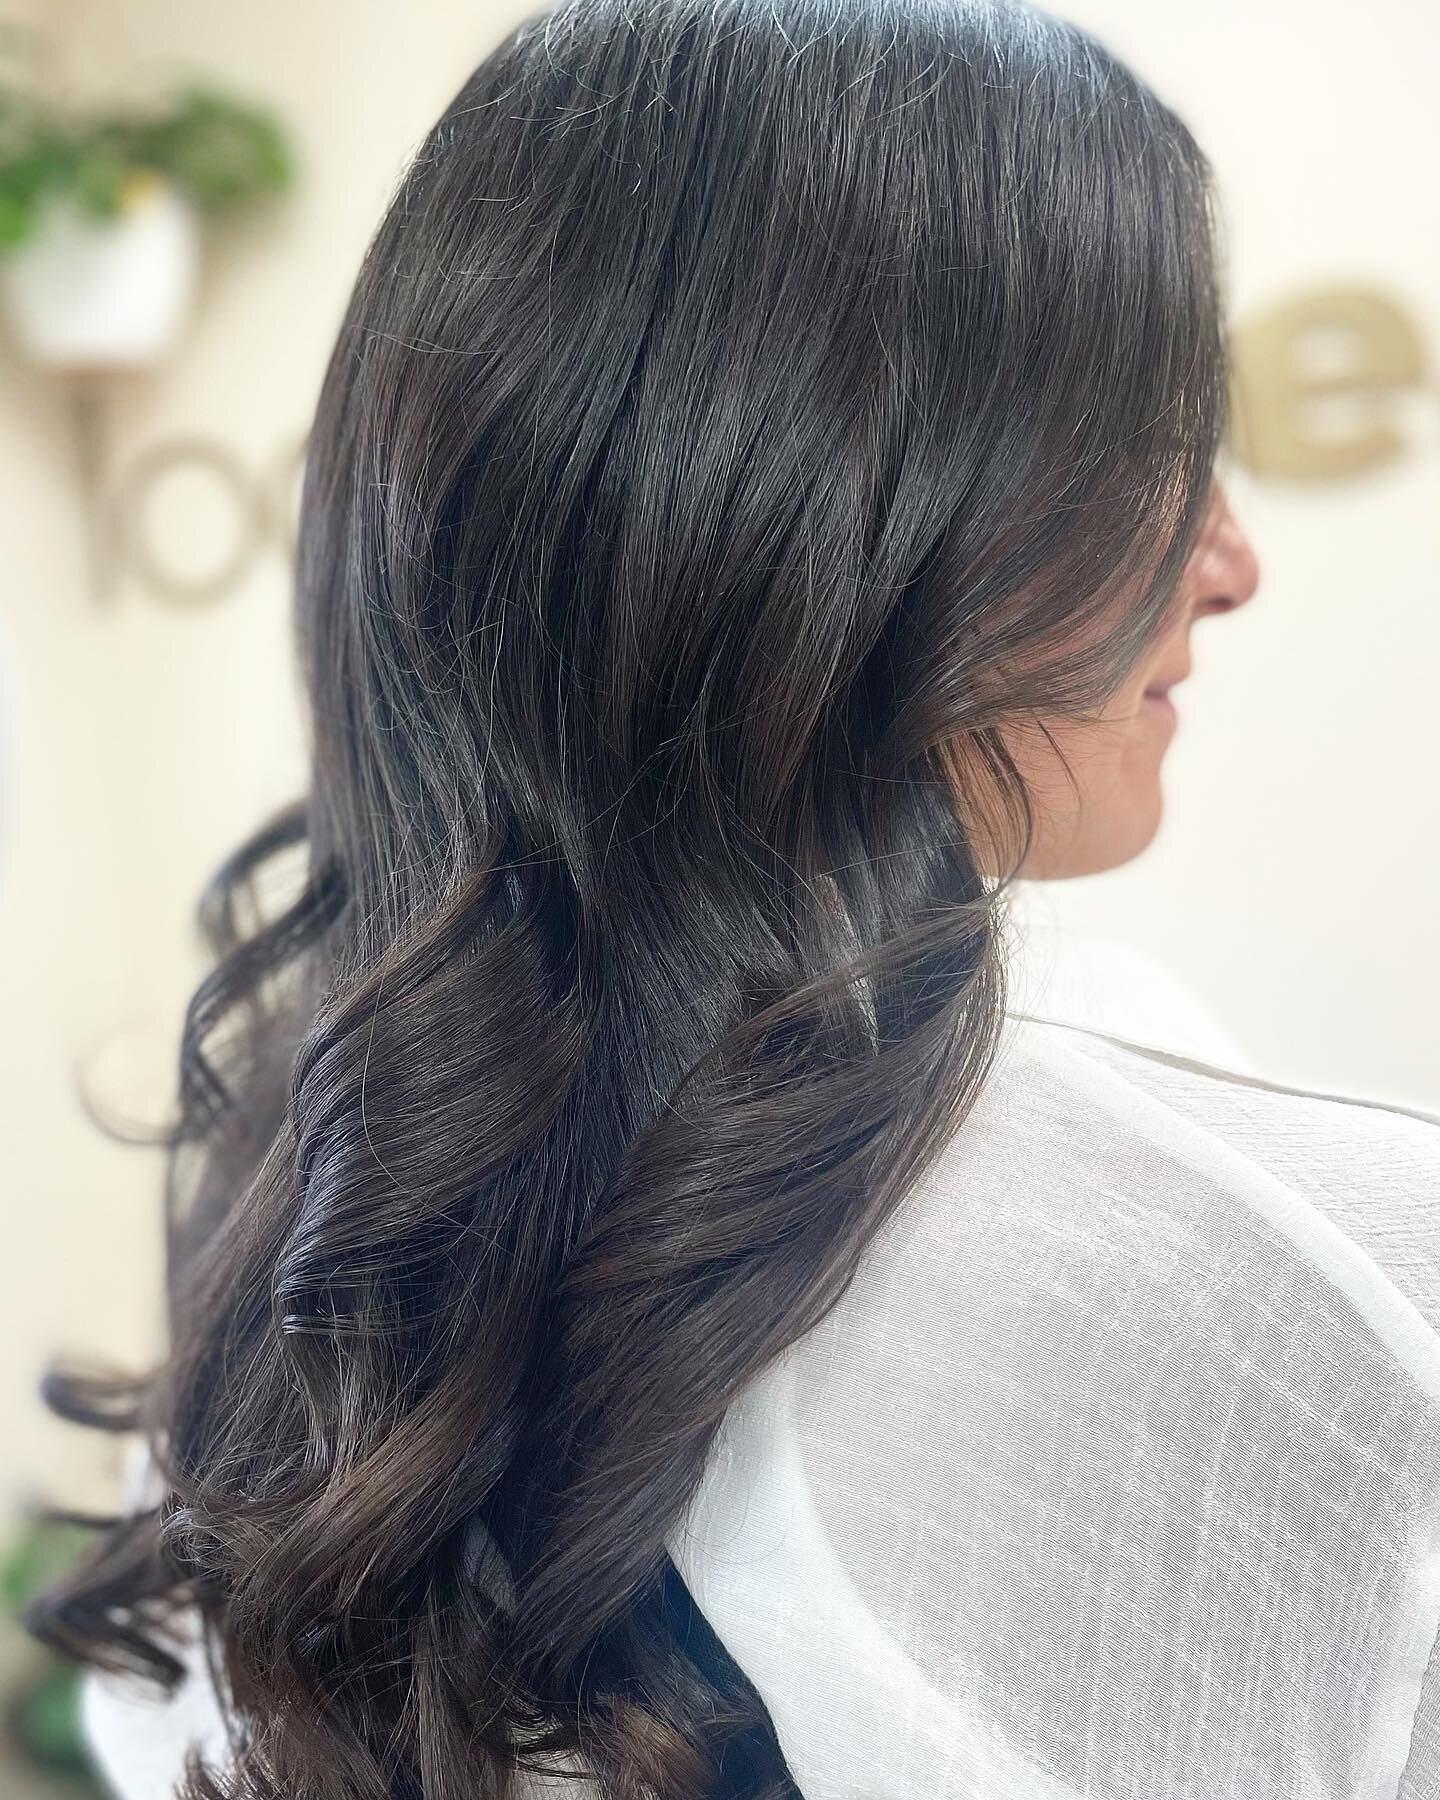 Bouncy waves &amp; a blowout make for the perfect pairing👌🏼Hair by Olivia @oczbeauty_